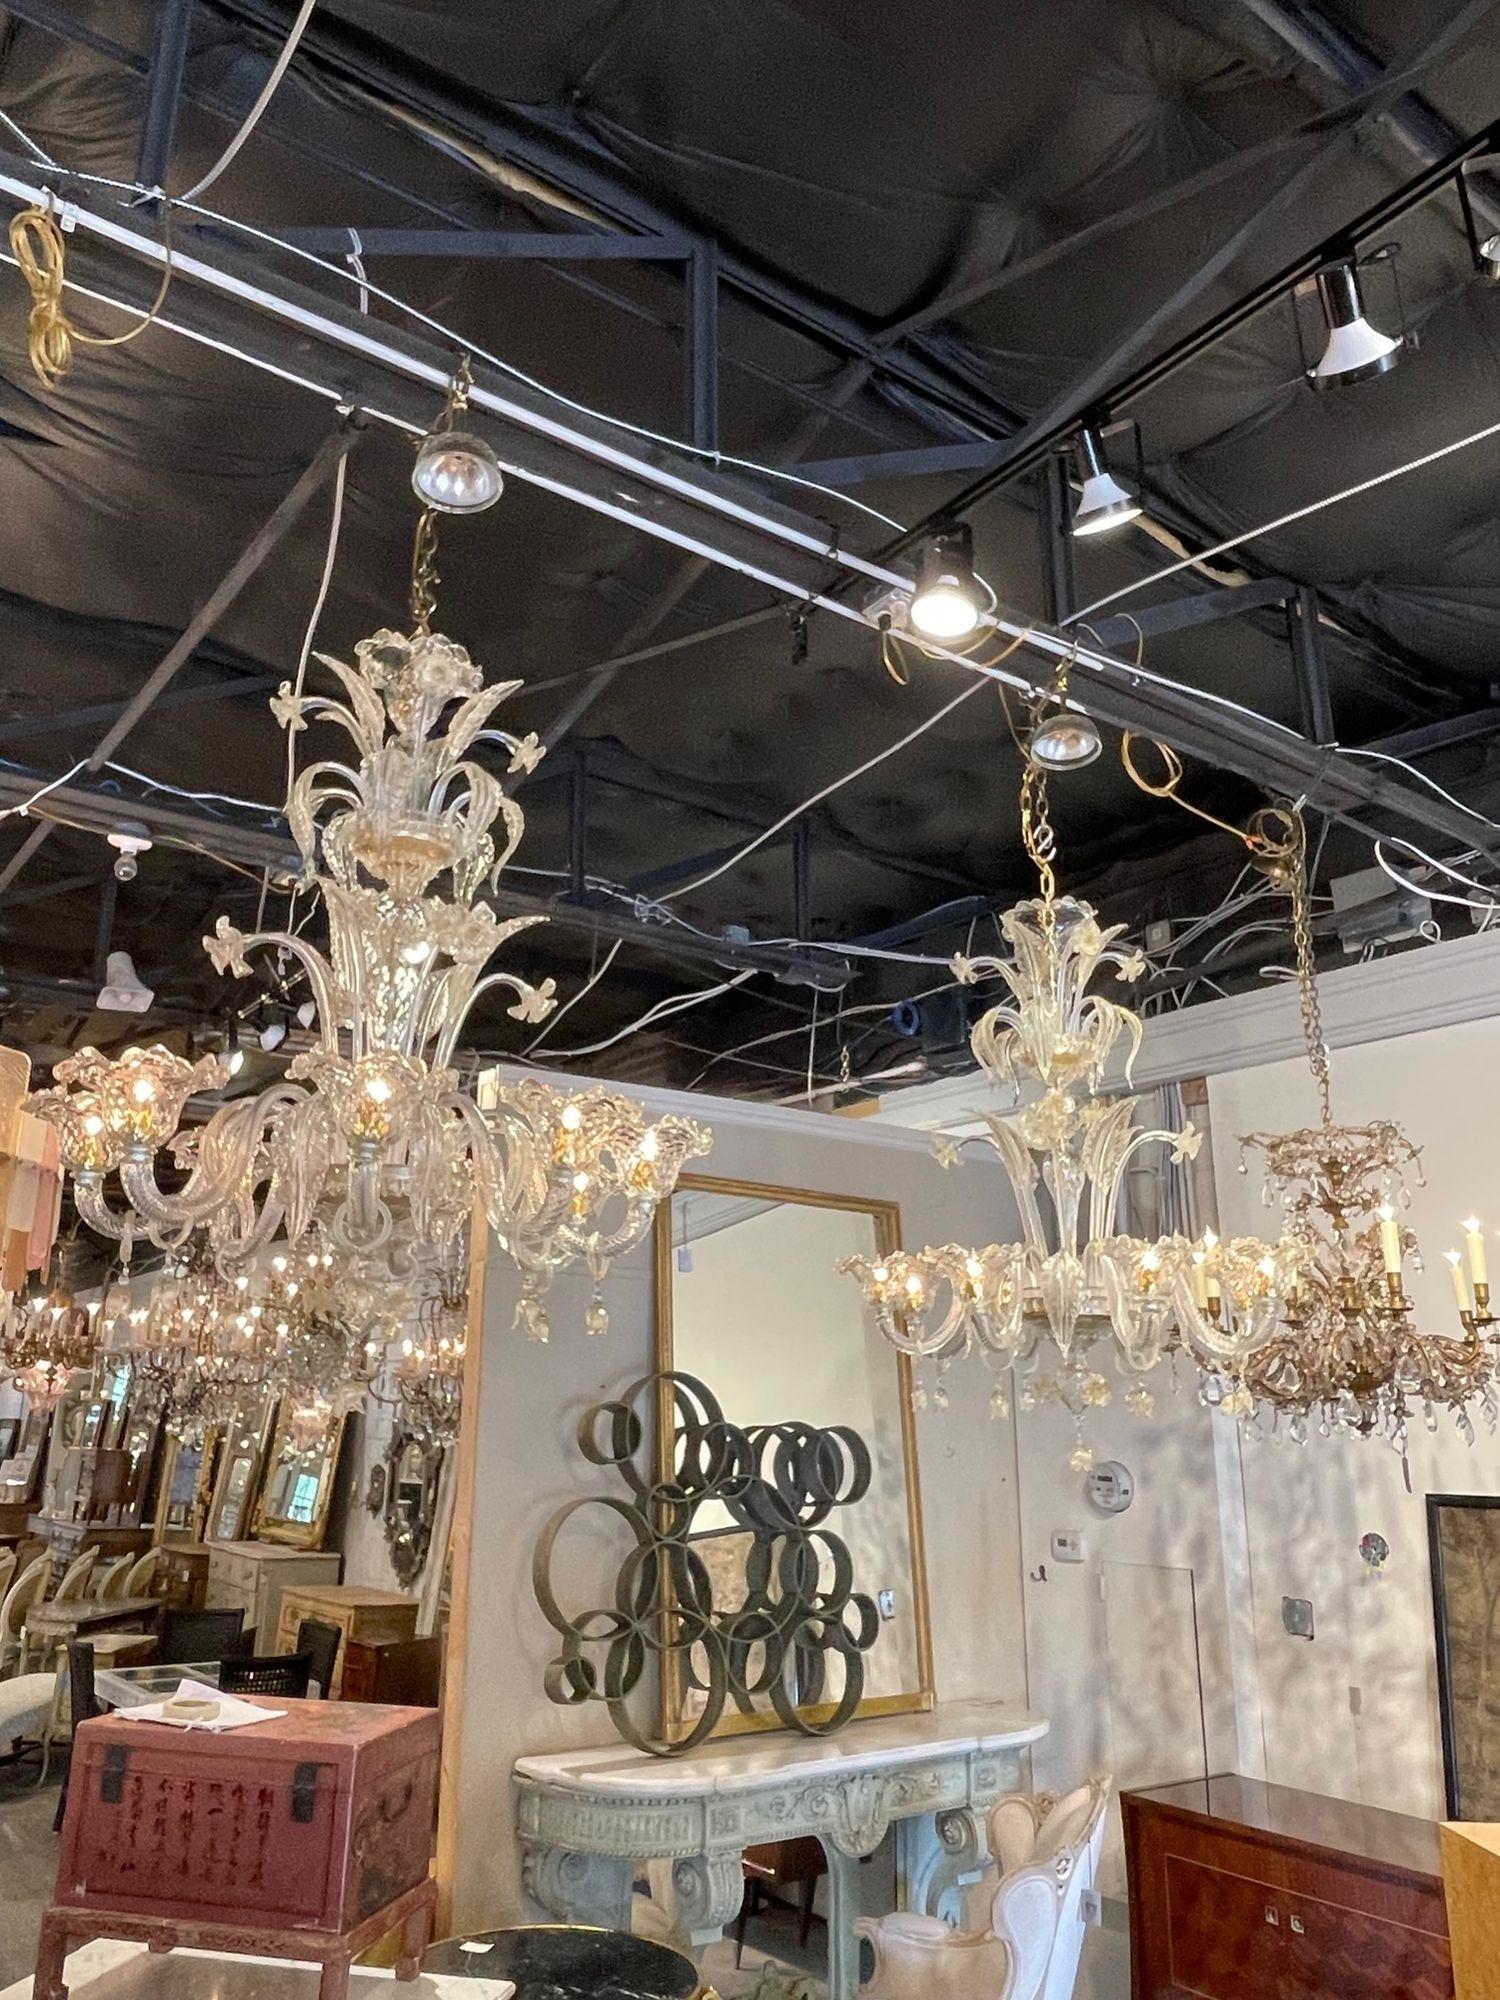 Decorative Venetian style Murano glass chandeliers. Featuring leaves and flowers and a touch of gold. Exquisite!!
Note: Price listed is for 1